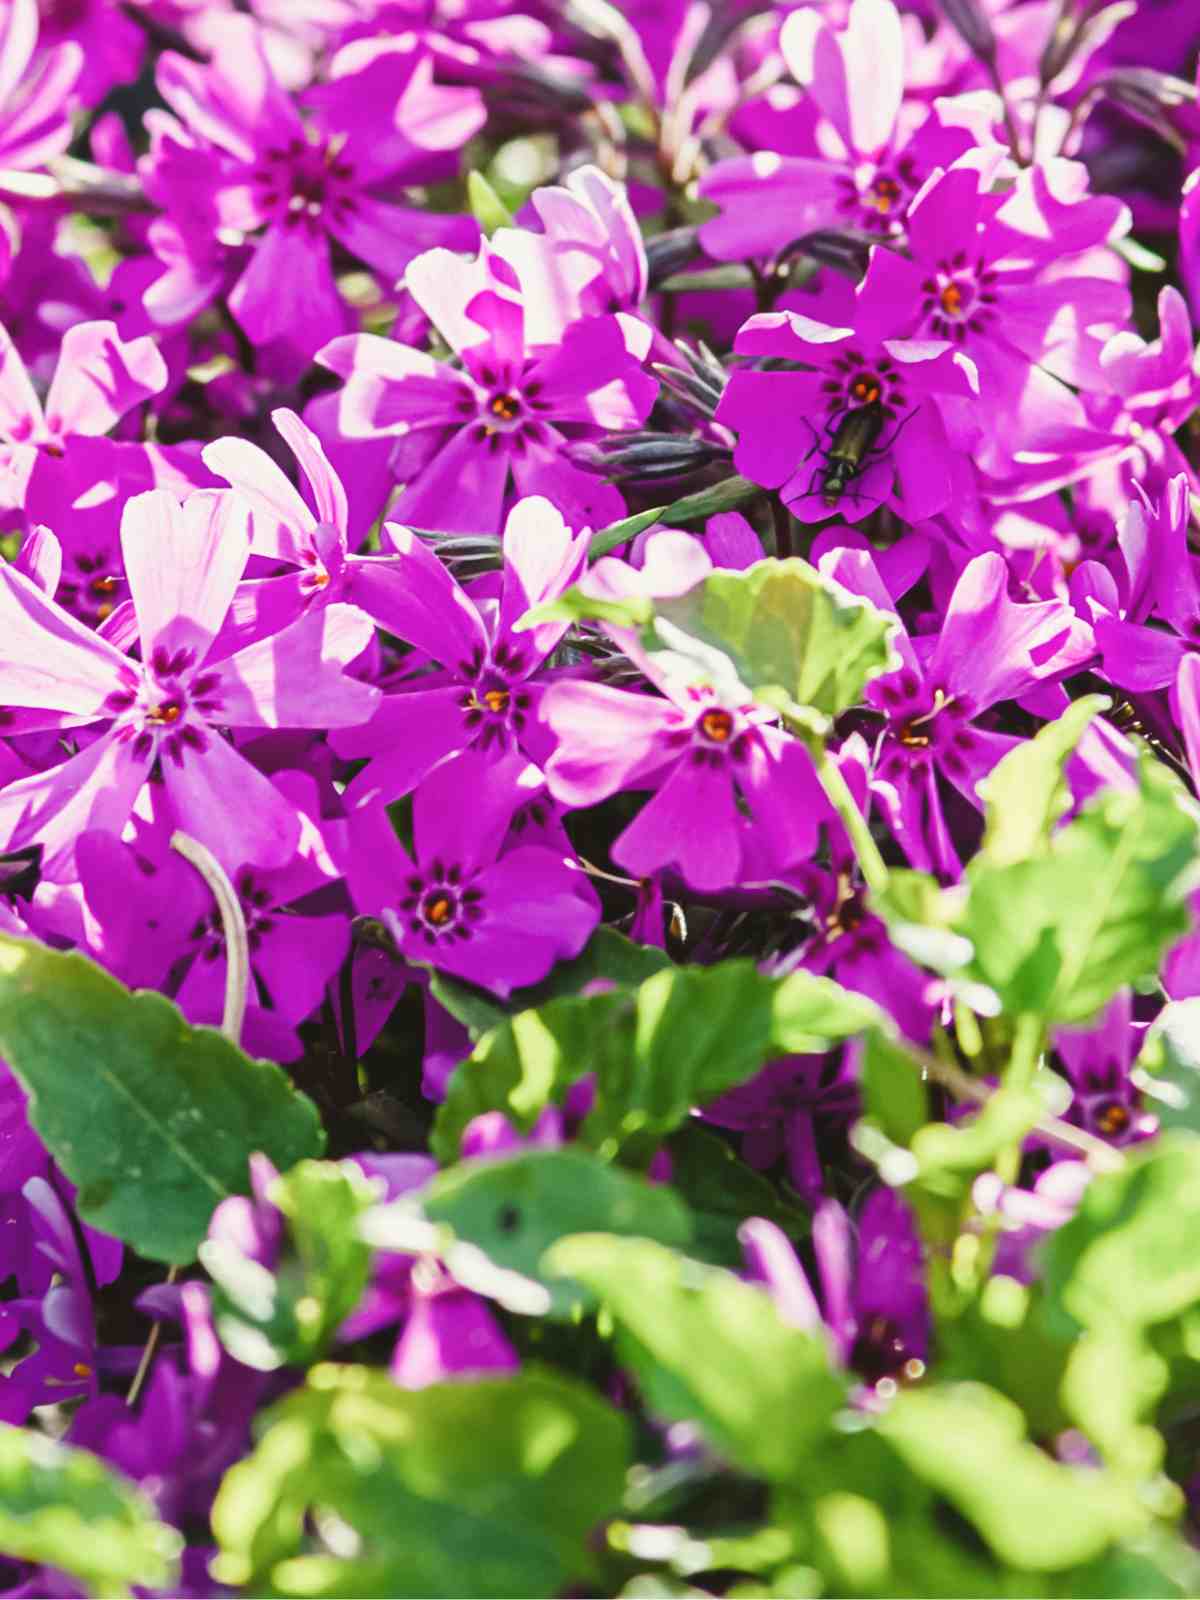 How to Grow and Care for Creeping Phlox Correctly